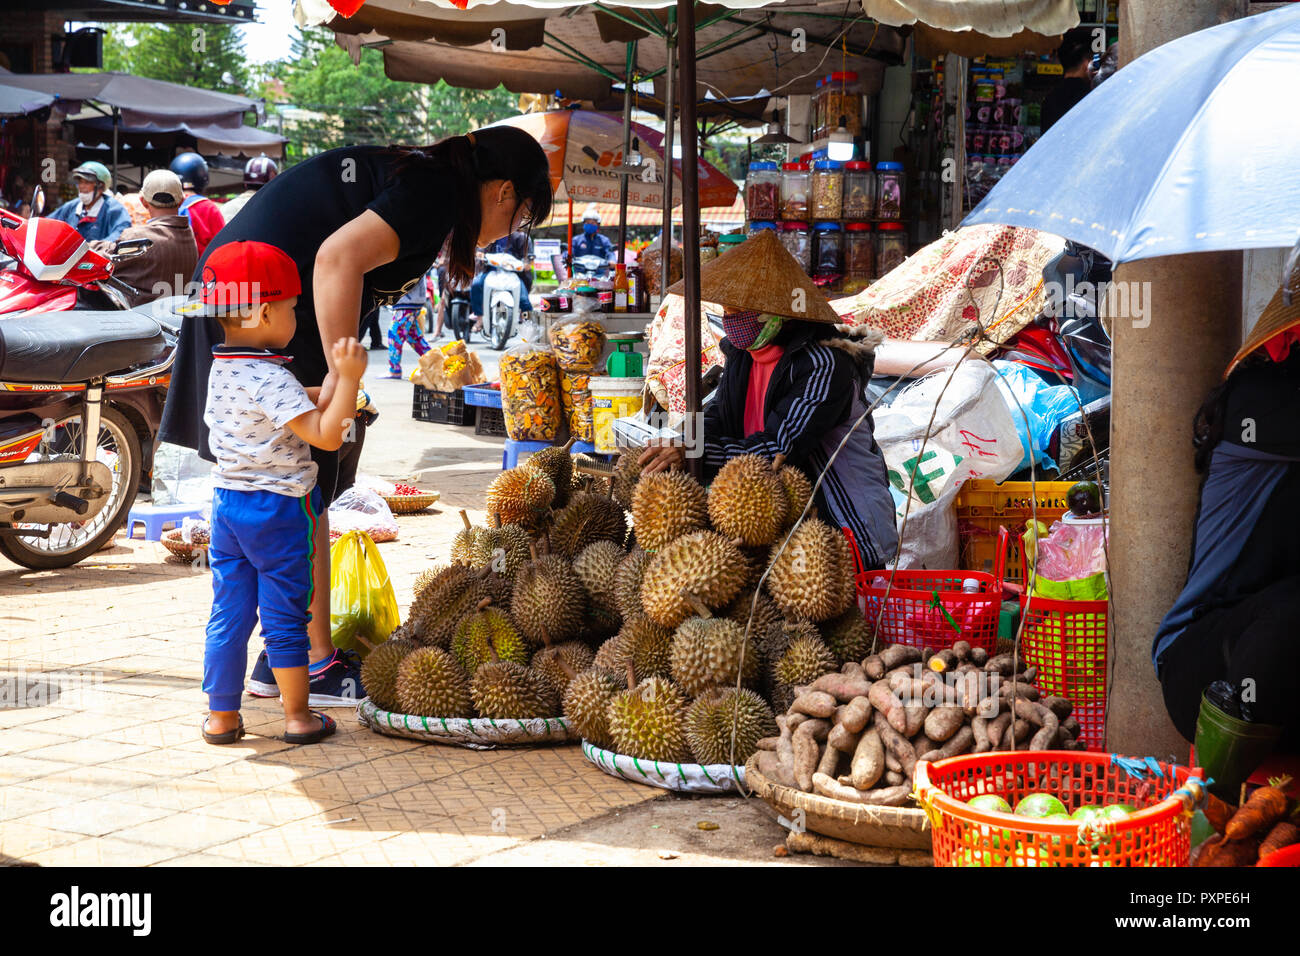 DA LAT, VIETNAM - SEPTEMBER 23: A Vietnamese woman with a child buys durian on the street market on September 23, 2018 in Da Lat, Vietnam. Stock Photo